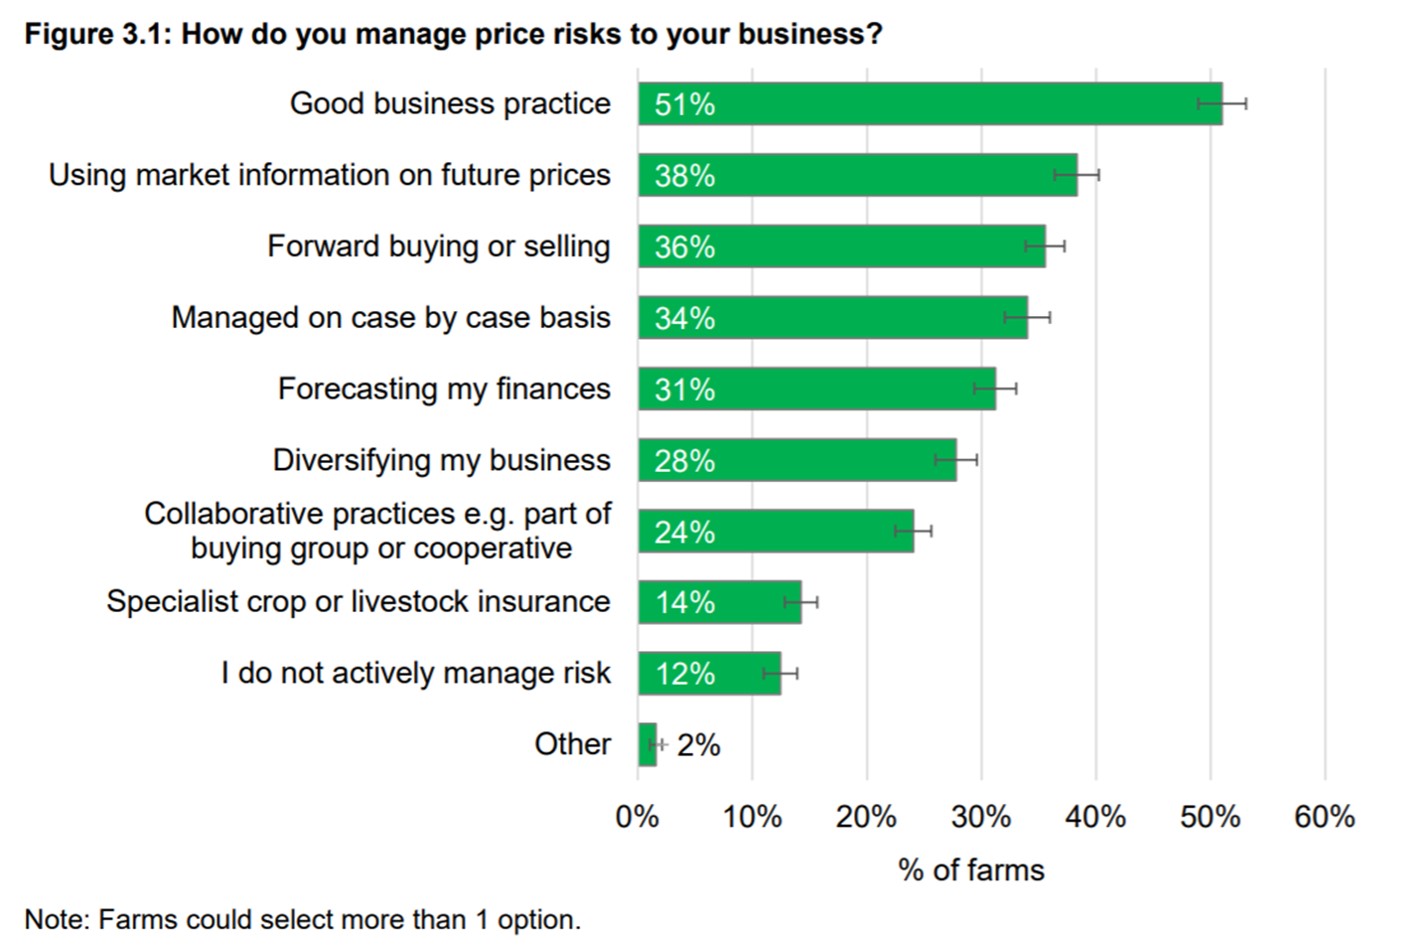 The most commonly selected risk management practice was “Good business practice”, by 51 percent of farms